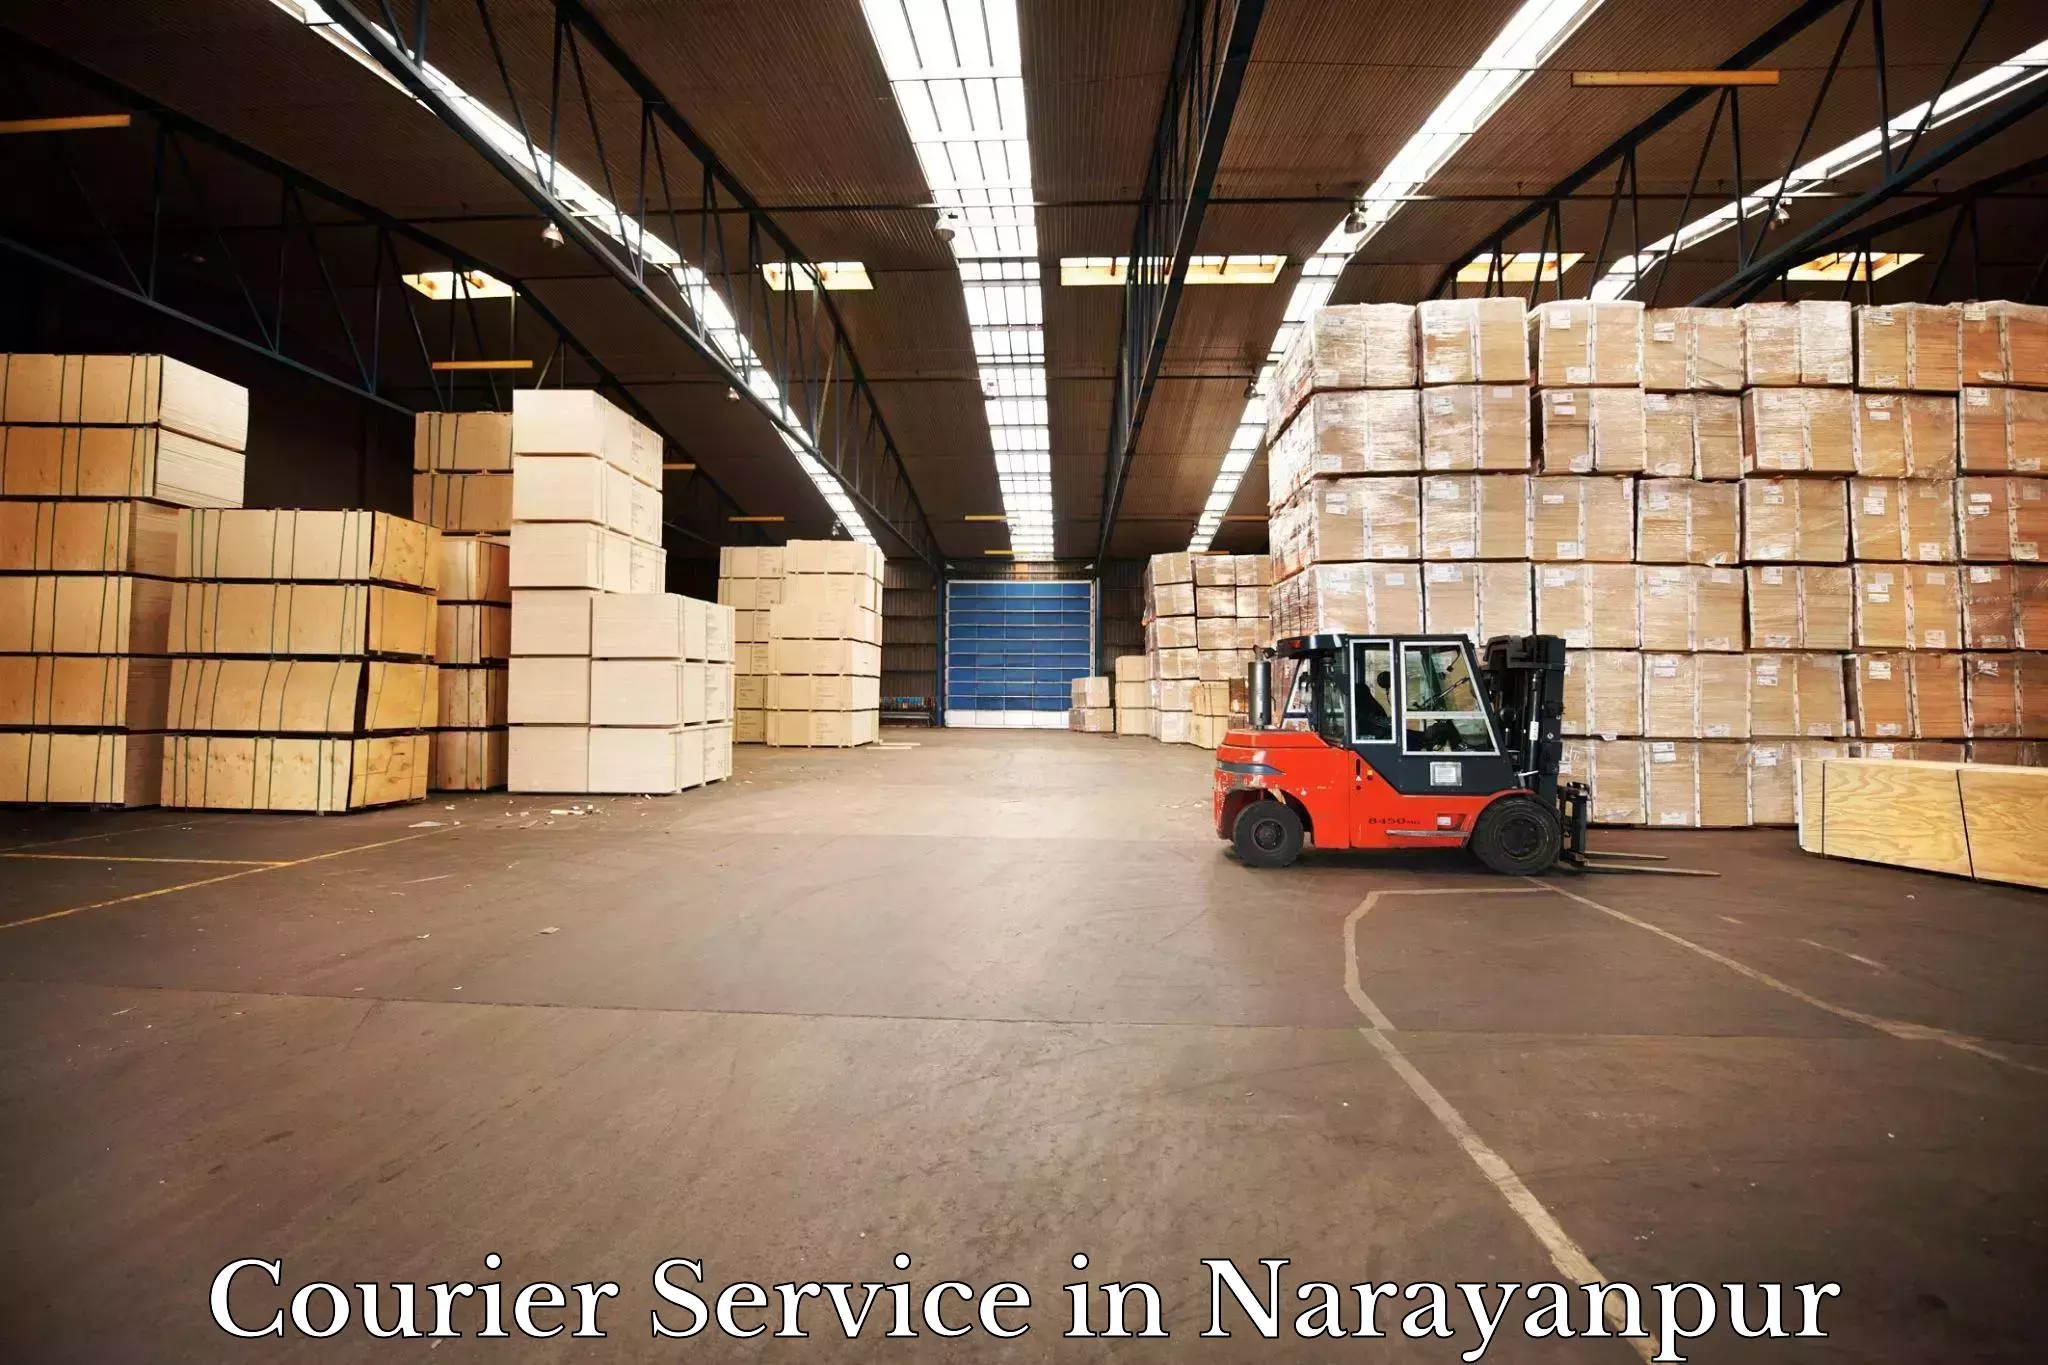 Comprehensive parcel tracking in Narayanpur